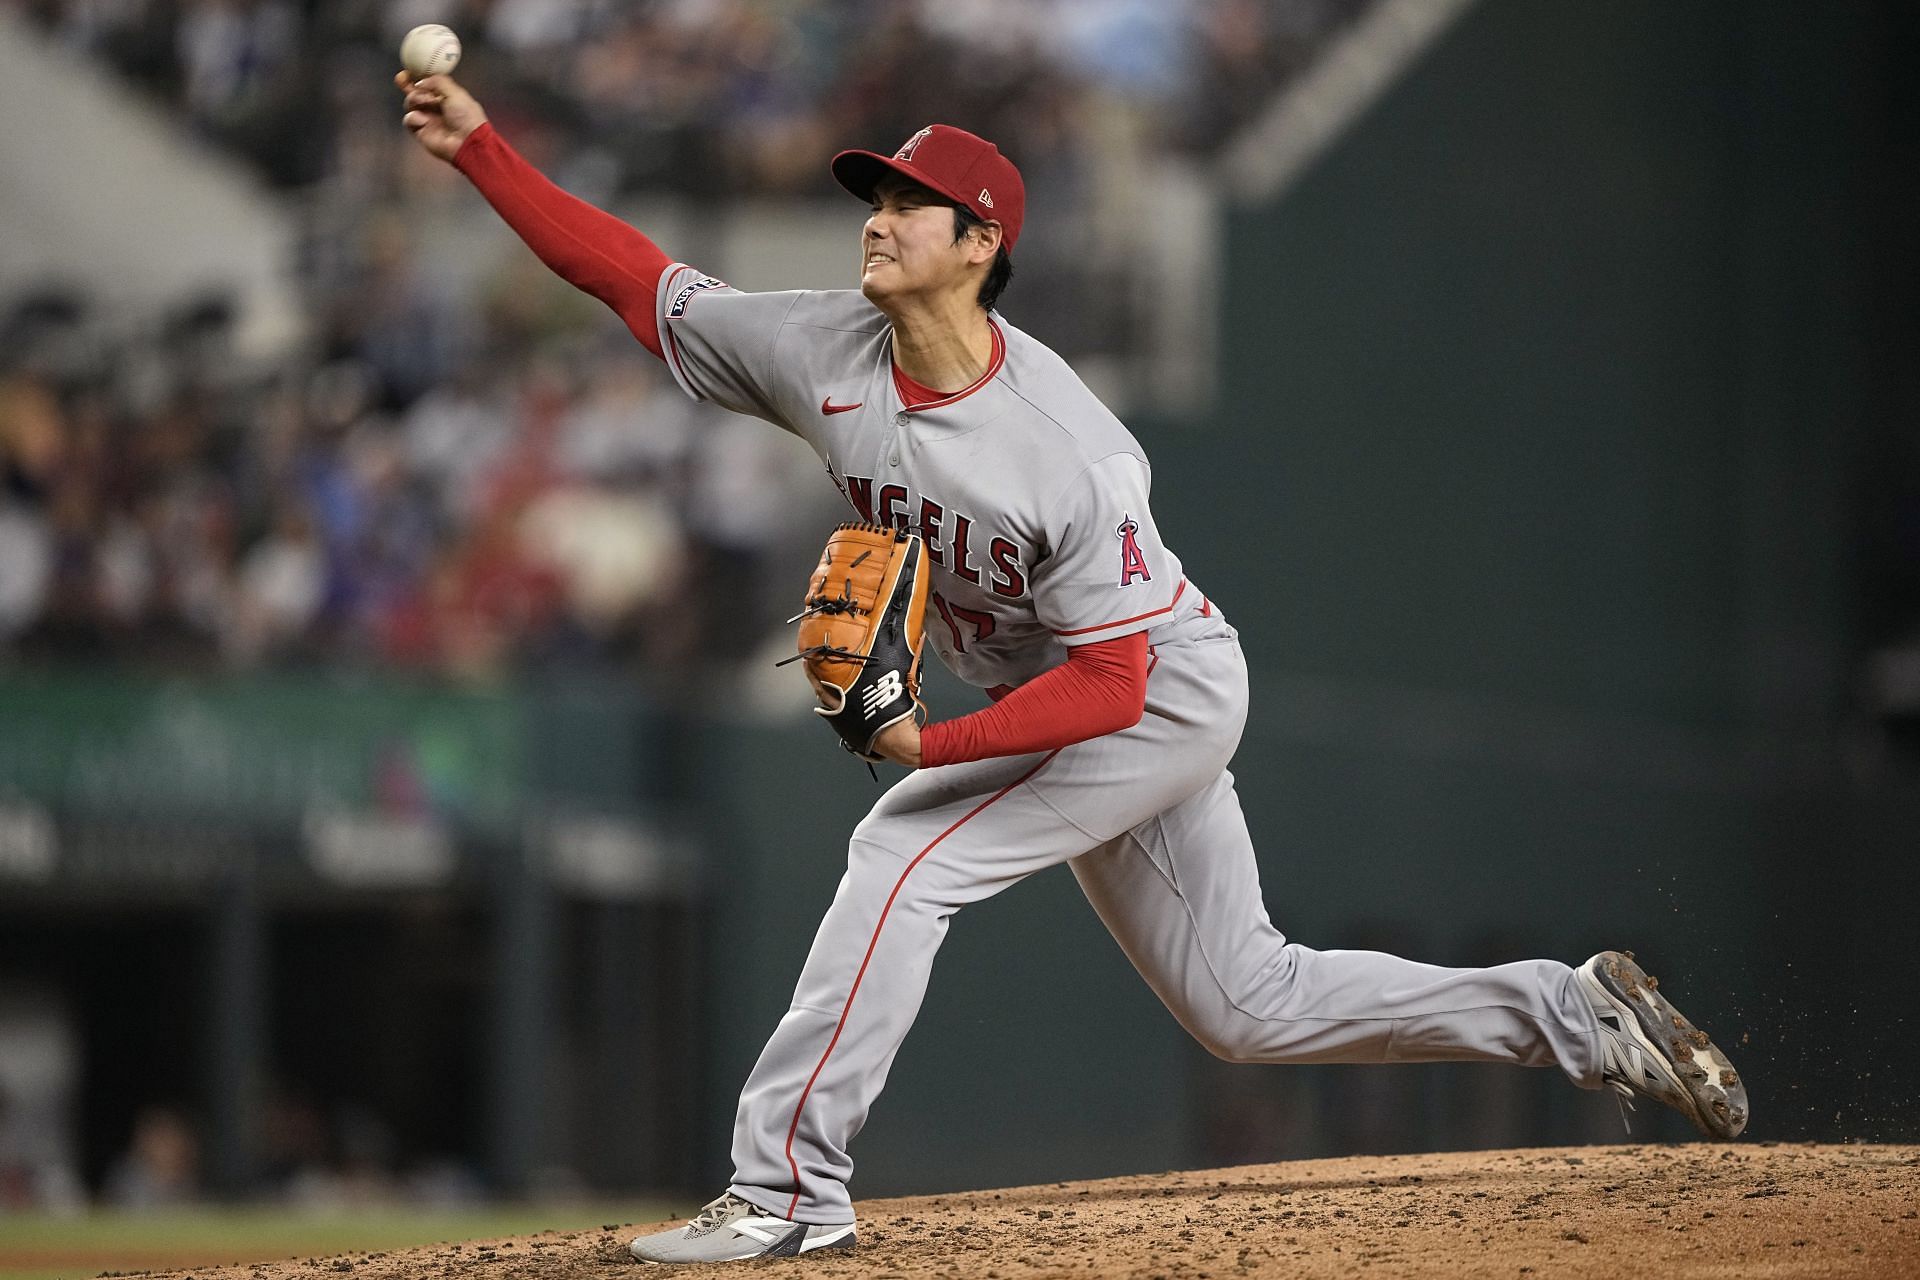 Shohei Ohtani of the Los Angeles Angels pitches against the Texas Rangers at Globe Life Field